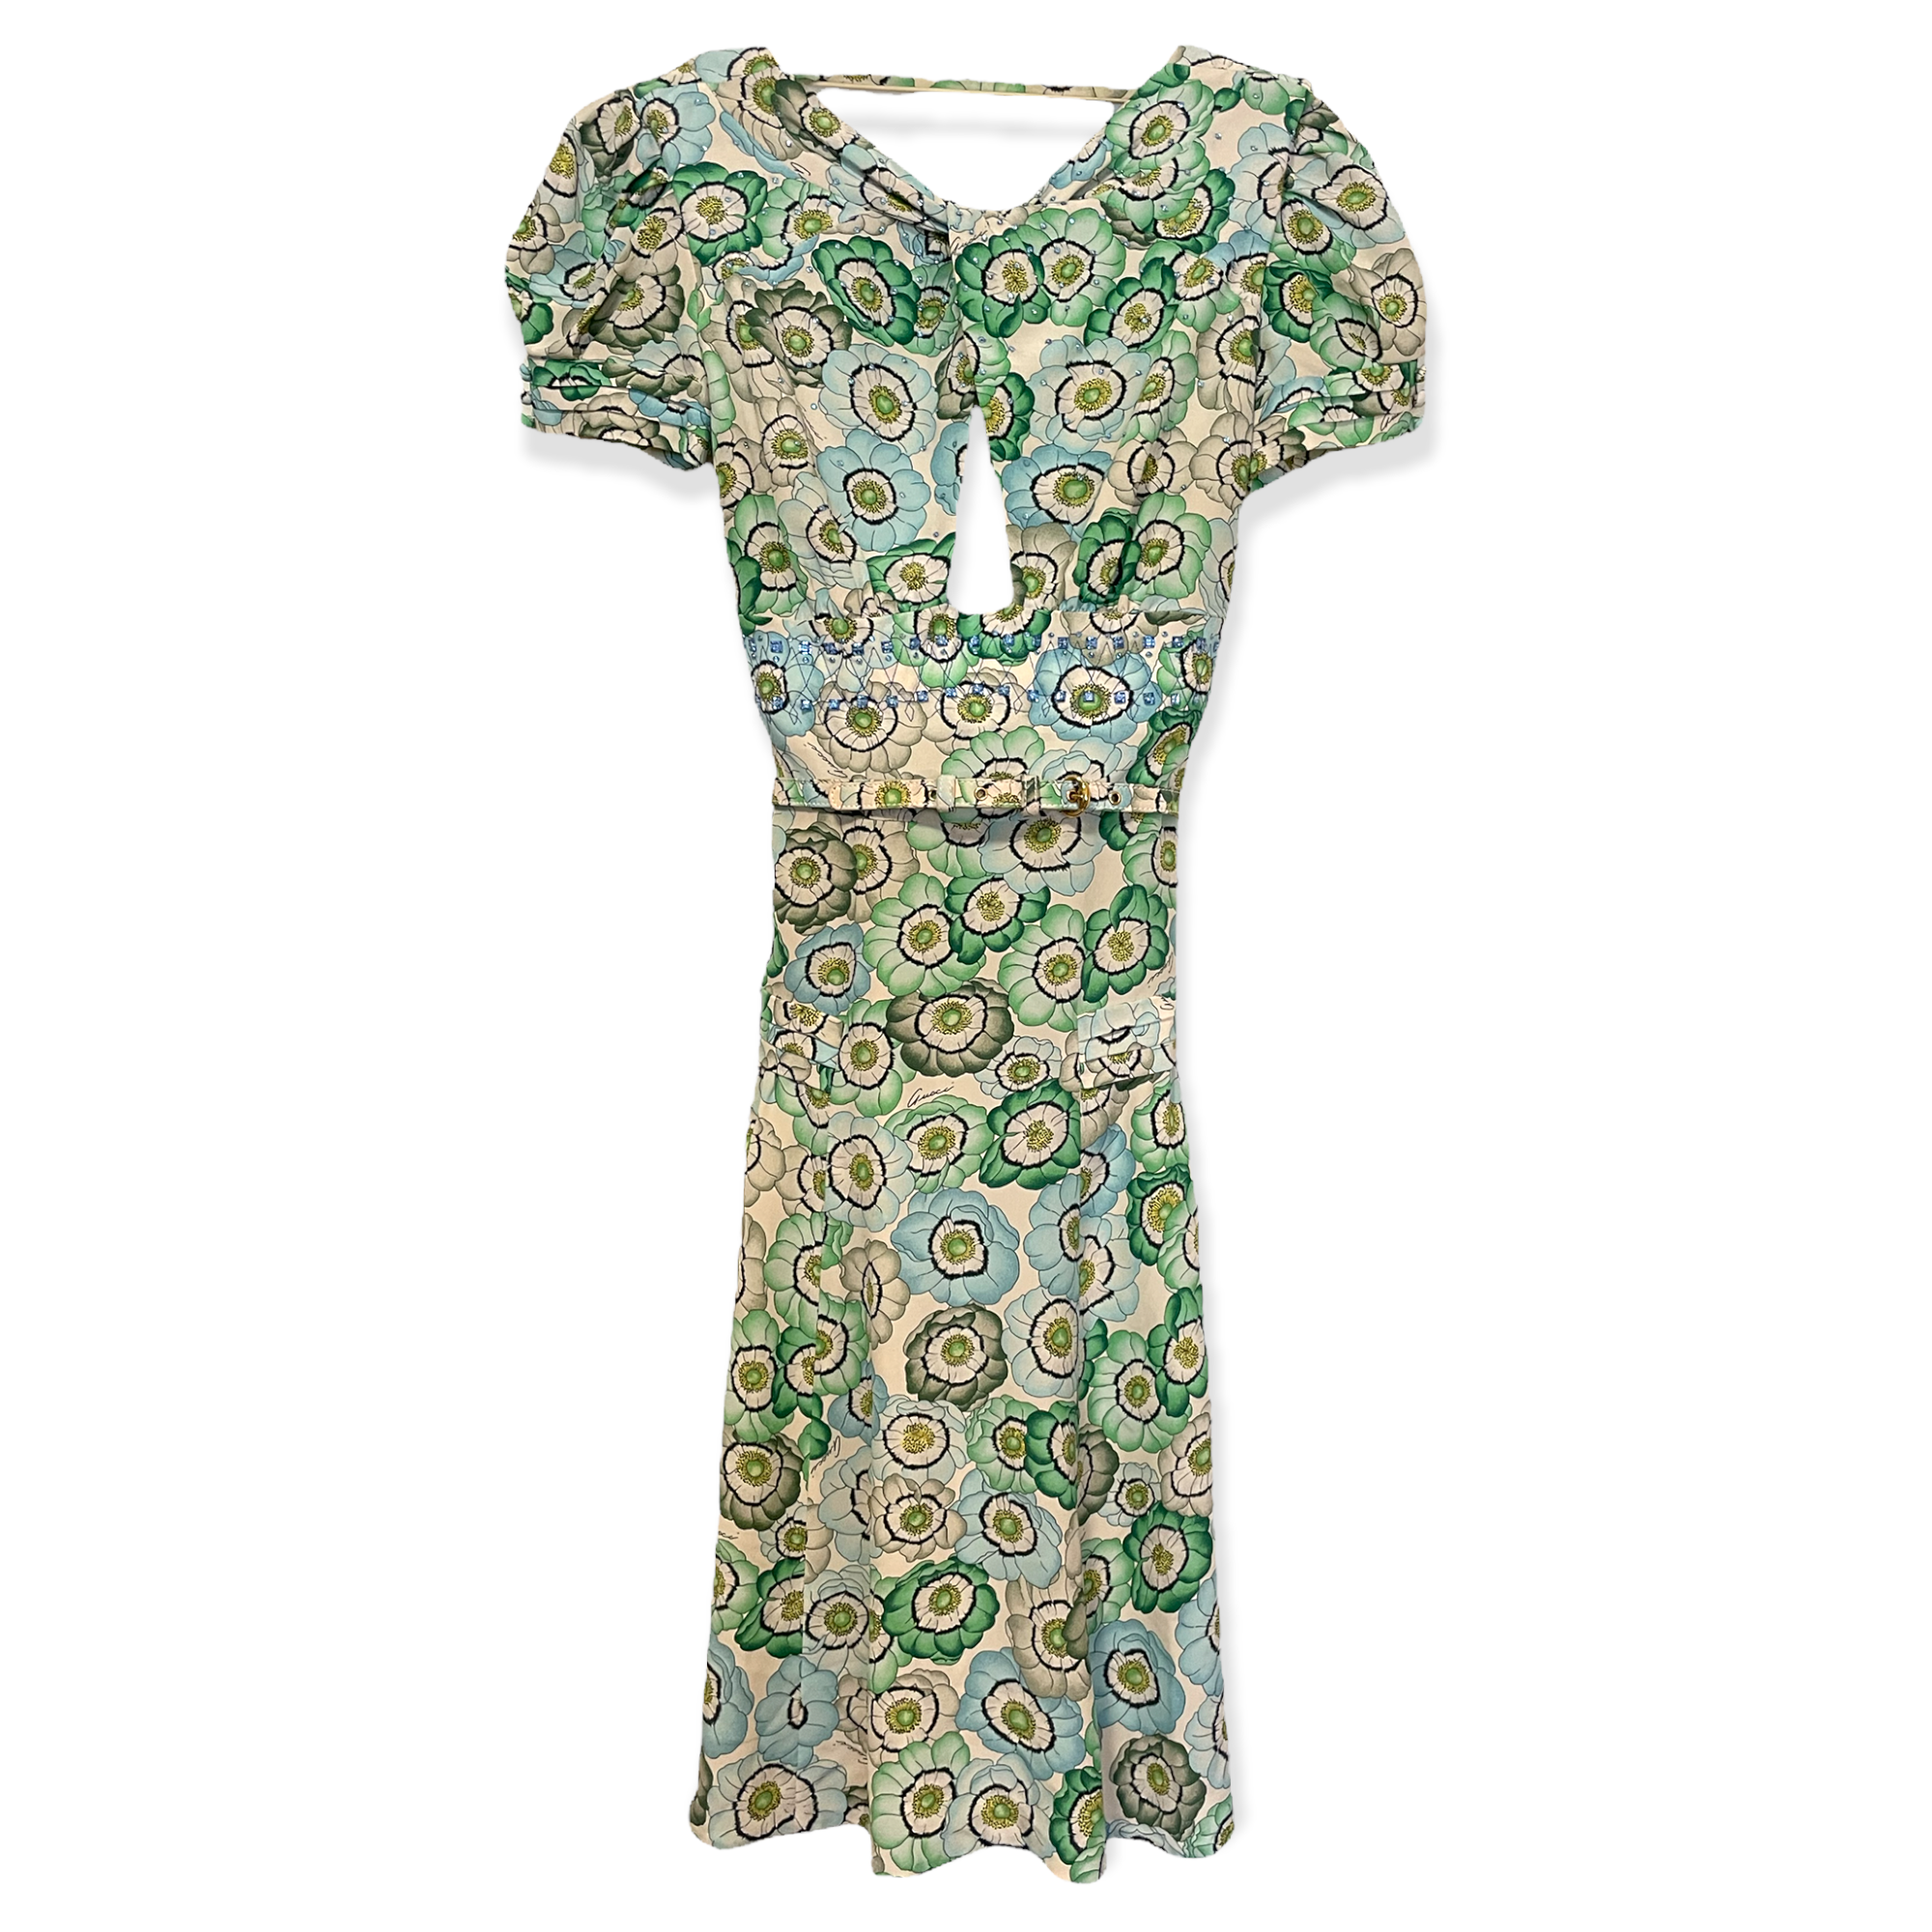 GUCCI dress in the iconic Gucci floral print |Size:IT40| Made in Italy